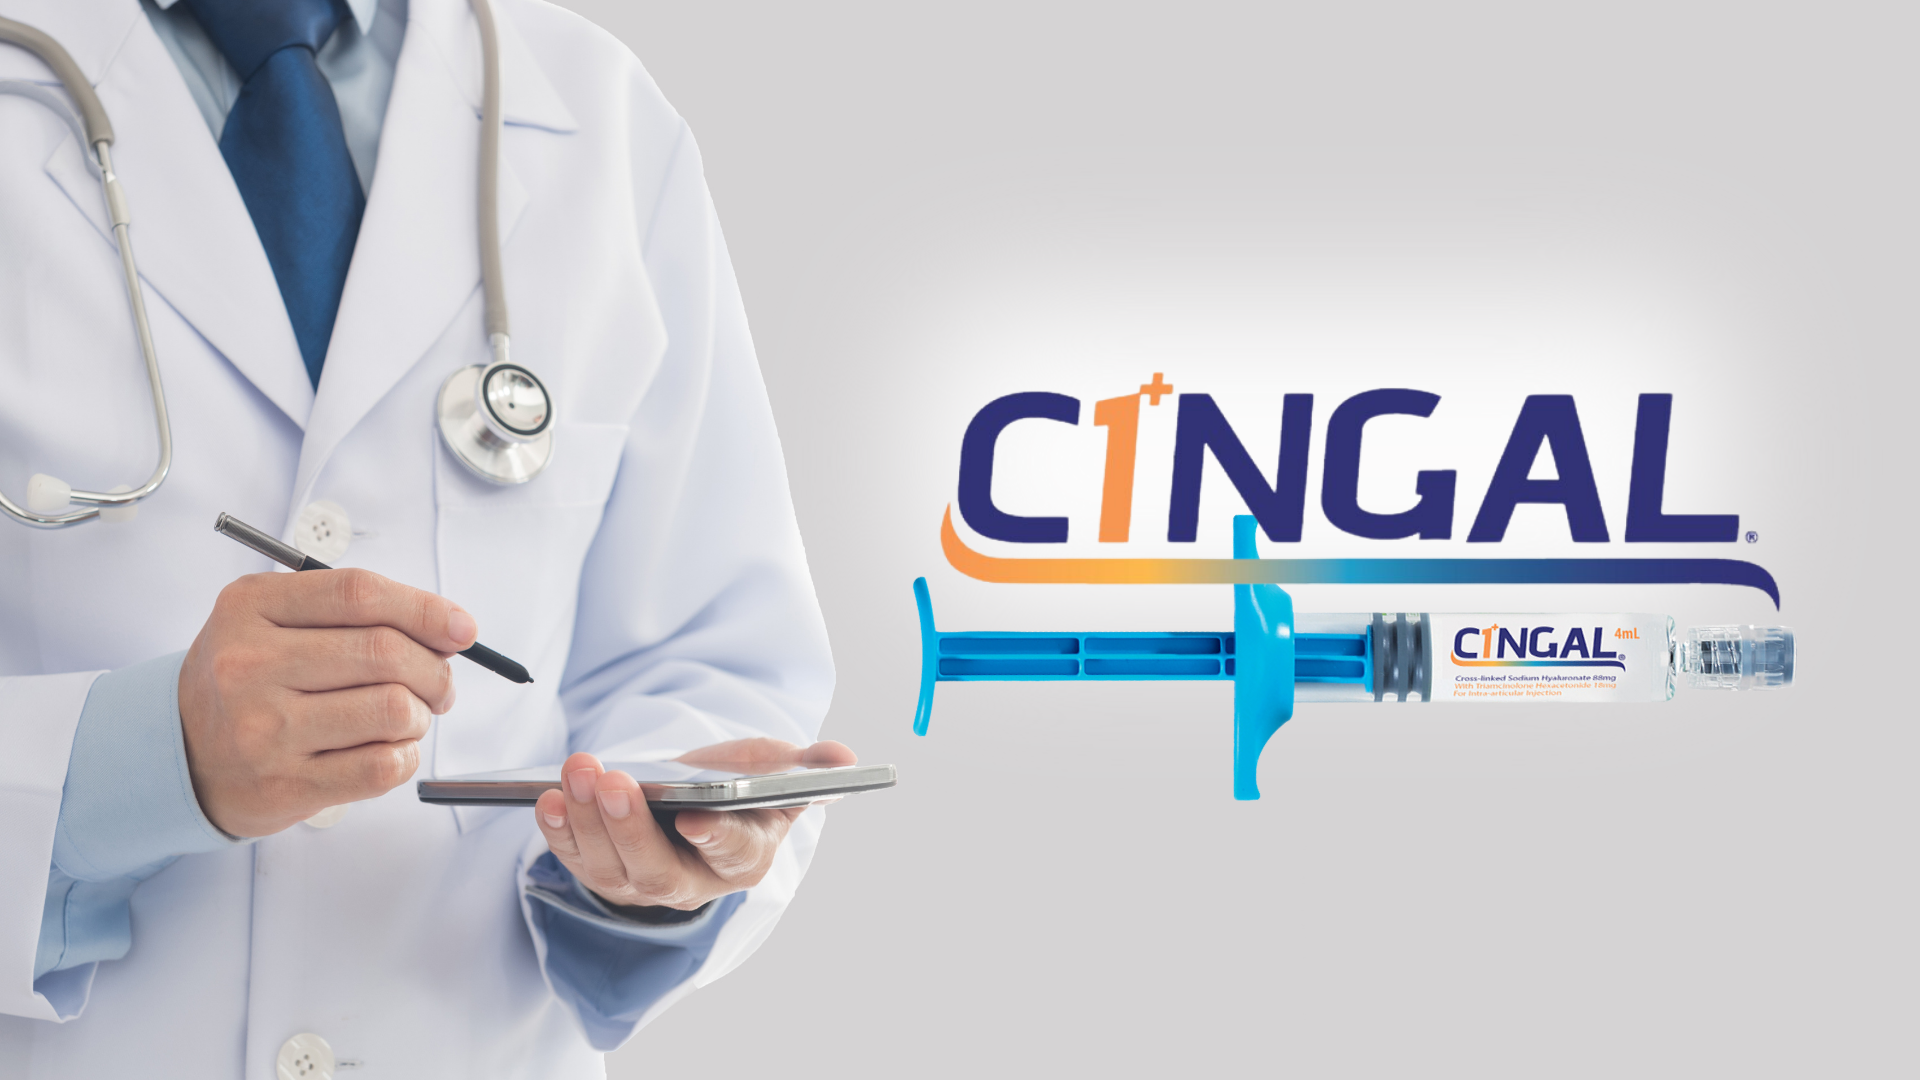 Doctor with tablet and the Cingal logo + syringe beside them.